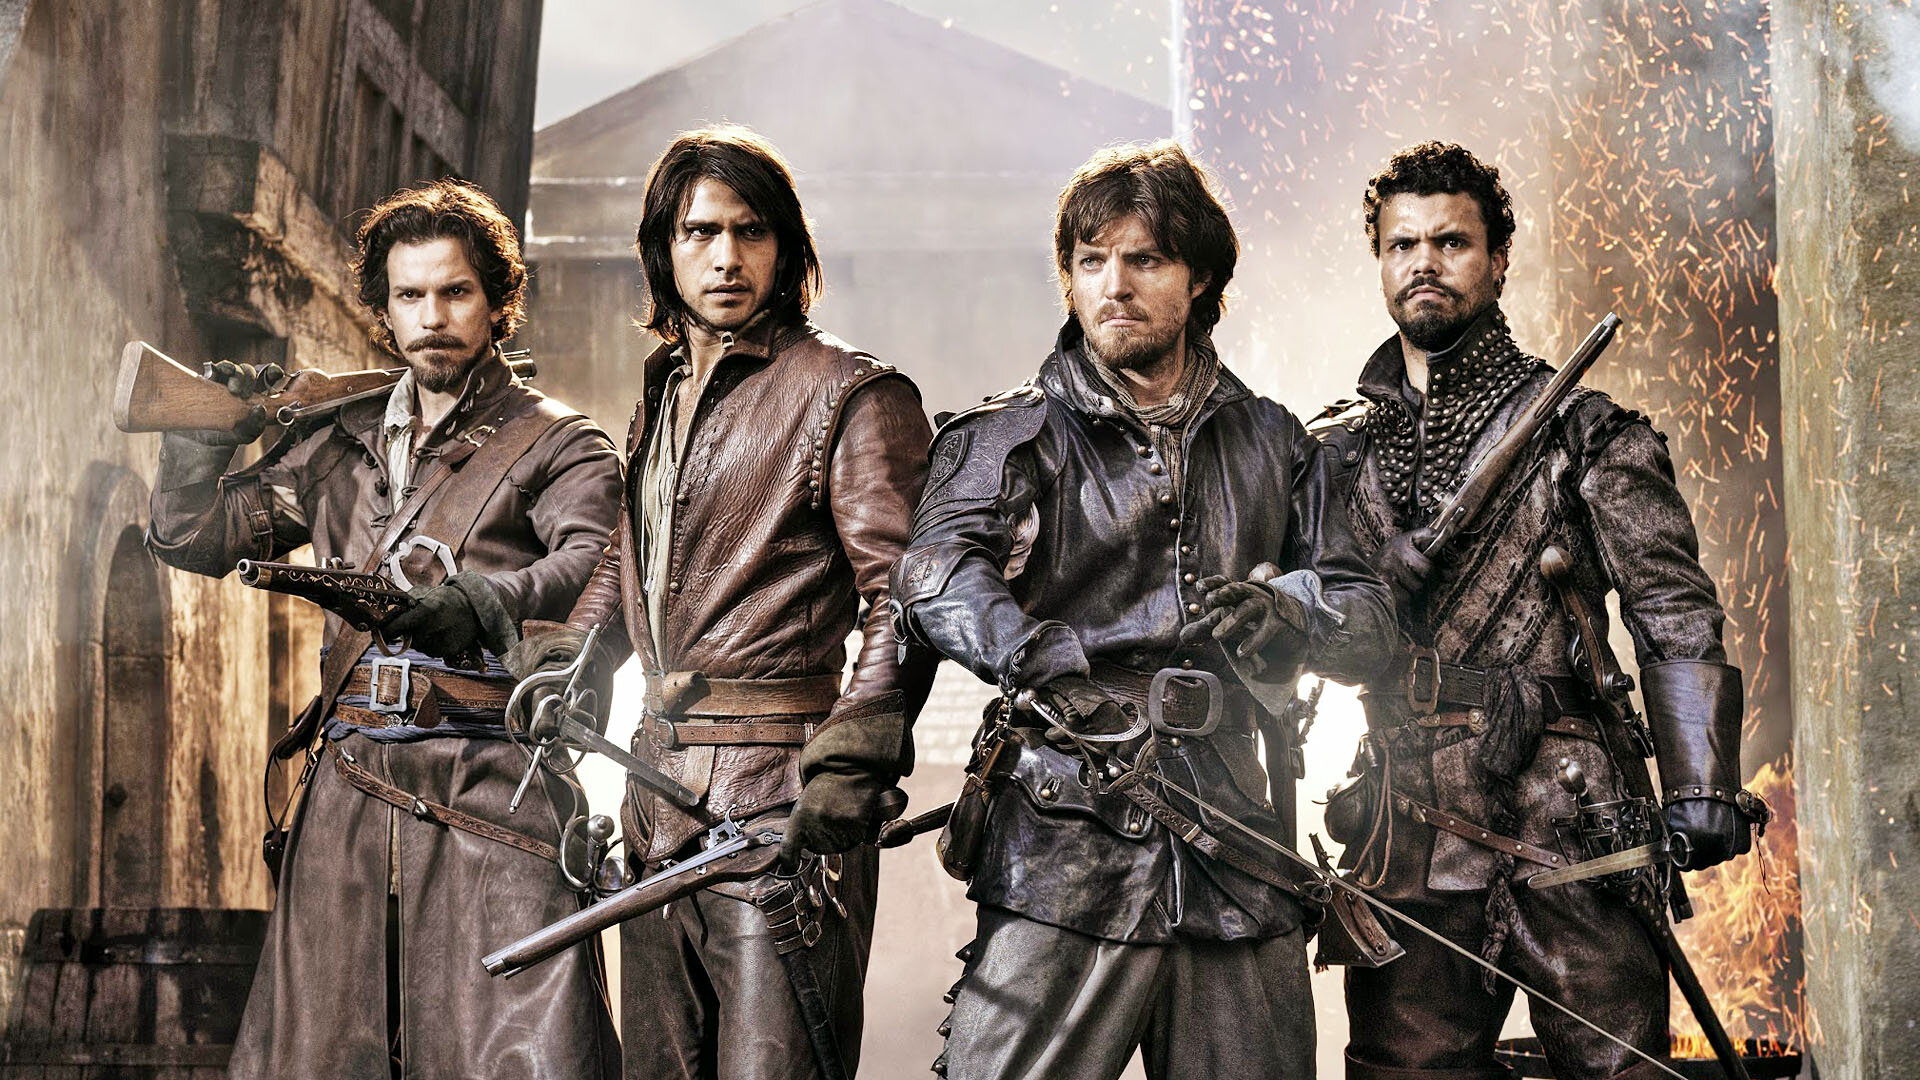 From left to right The Musketeers: Aramis, d'Artagnan,  Athos, and Porthos.